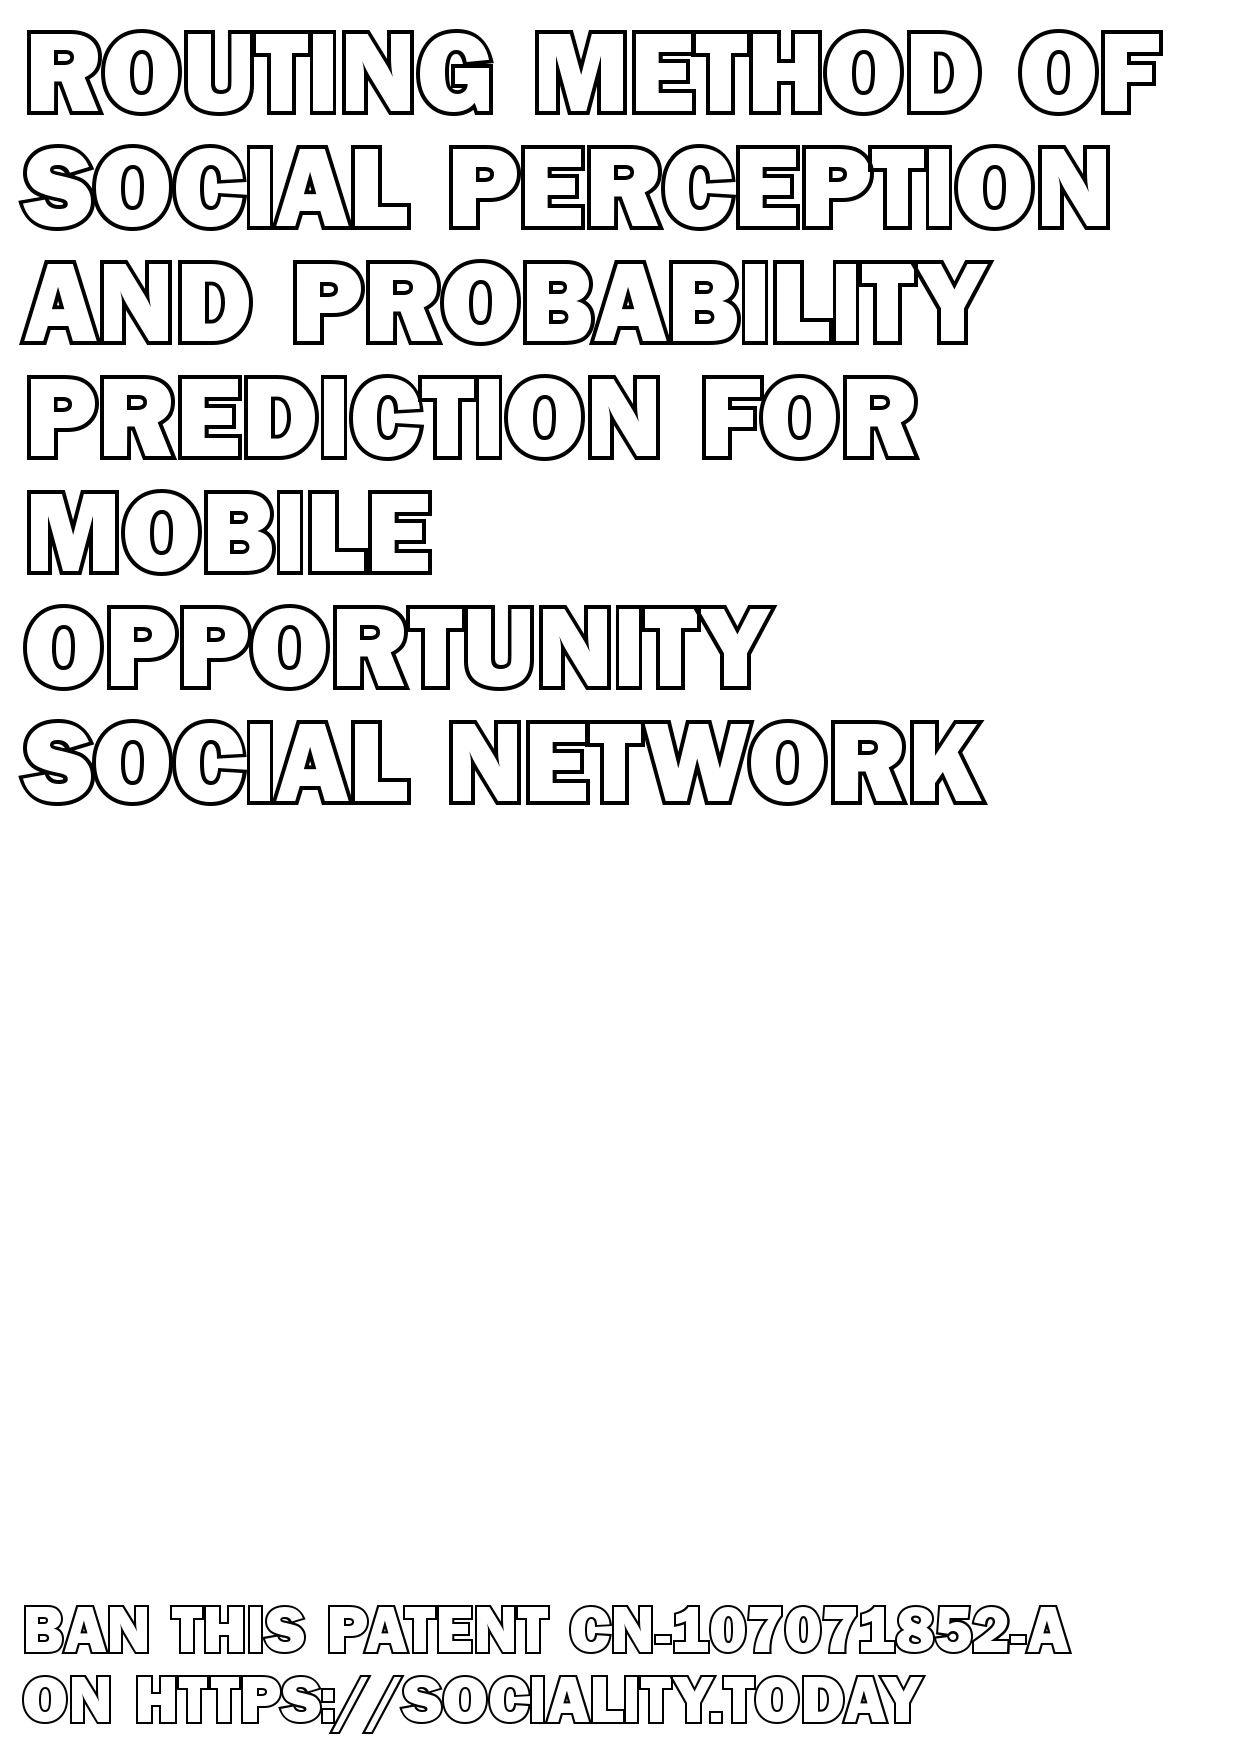 Routing method of social perception and probability prediction for mobile opportunity social network  - CN-107071852-A